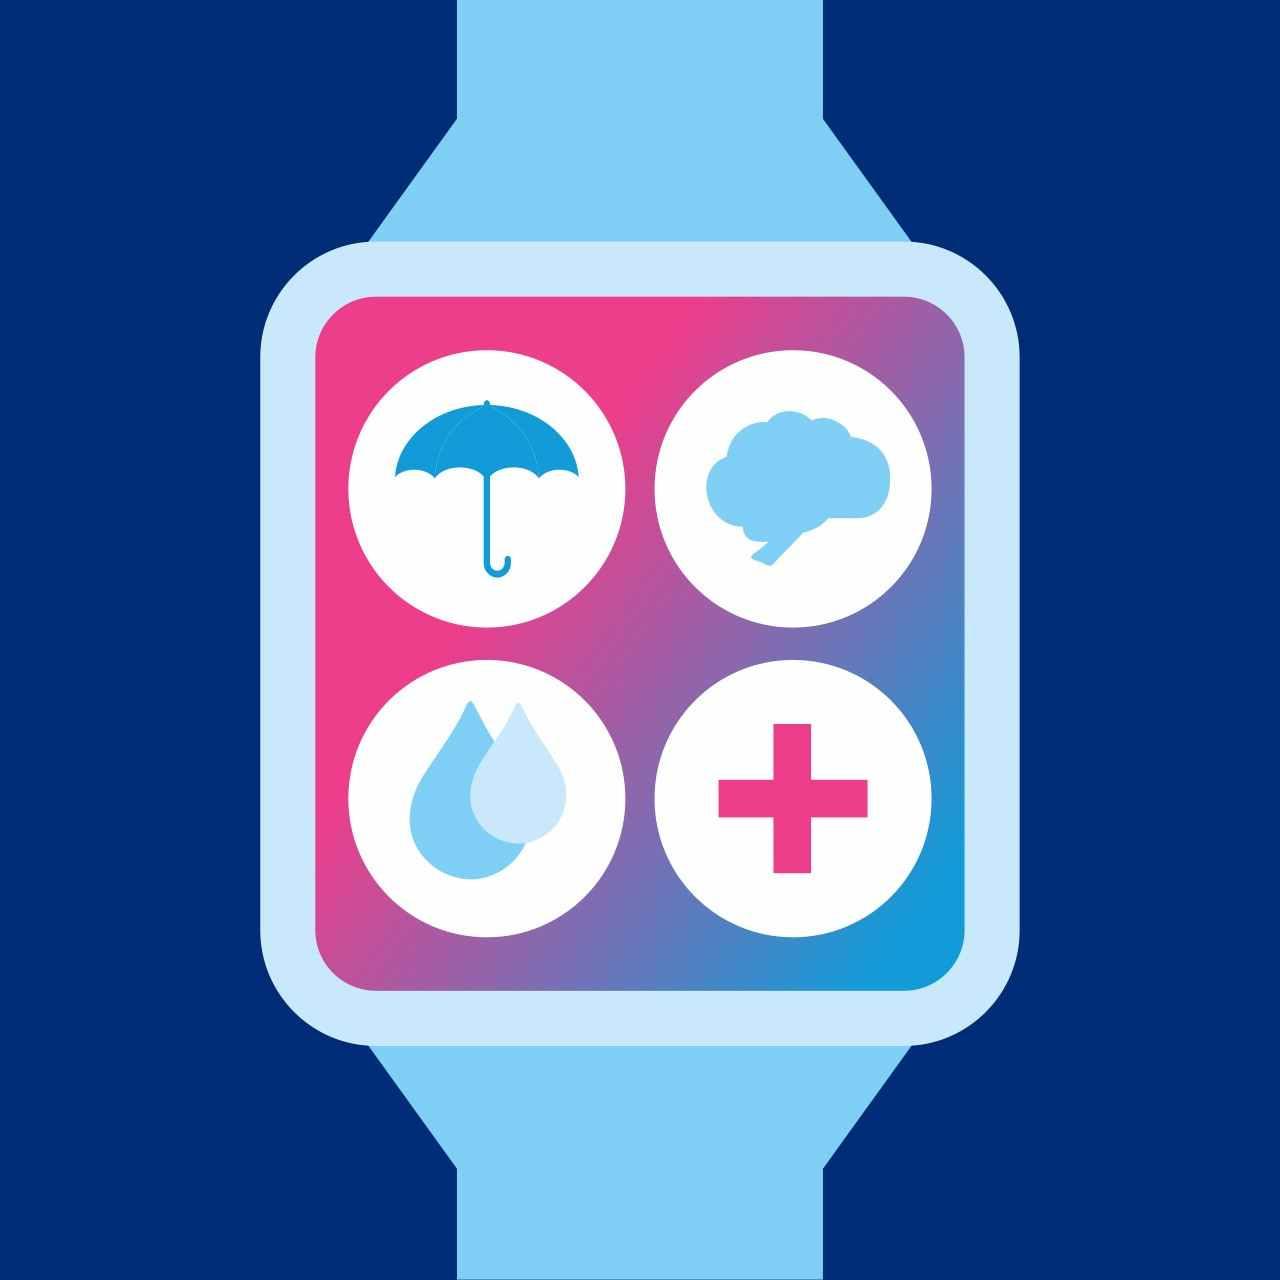 Watch with icons with dark blue background